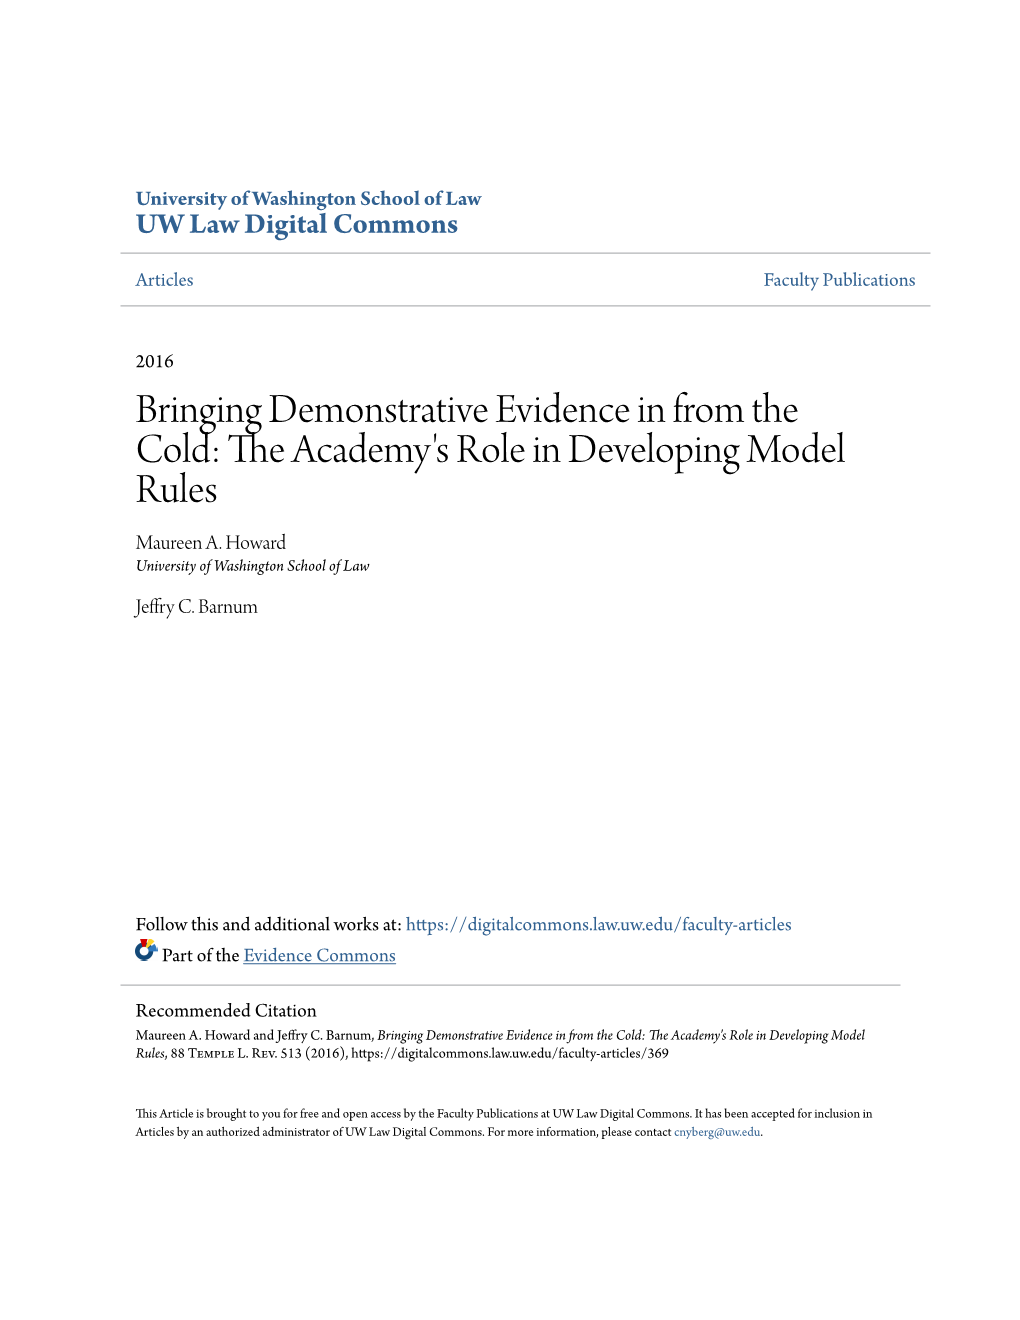 Bringing Demonstrative Evidence in from the Cold: the Academy's Role in Developing Model Rules Maureen A